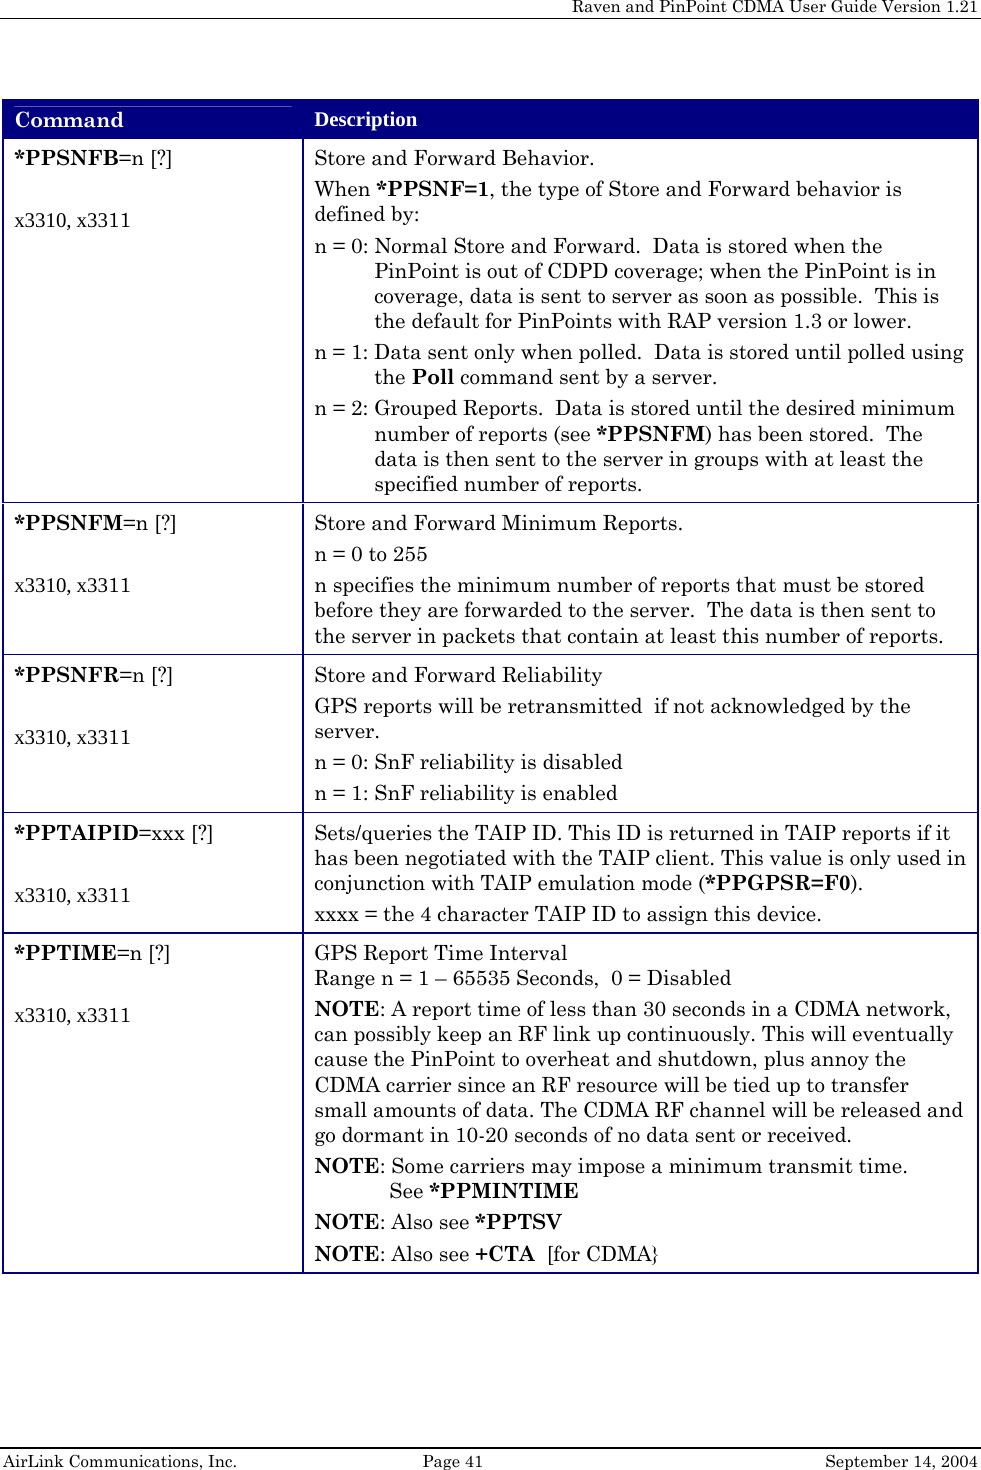     Raven and PinPoint CDMA User Guide Version 1.21  AirLink Communications, Inc.  Page 41  September 14, 2004 Command  Description *PPSNFB=n [?]  x3310, x3311 Store and Forward Behavior.  When *PPSNF=1, the type of Store and Forward behavior is defined by: n = 0: Normal Store and Forward.  Data is stored when the PinPoint is out of CDPD coverage; when the PinPoint is in coverage, data is sent to server as soon as possible.  This is the default for PinPoints with RAP version 1.3 or lower. n = 1: Data sent only when polled.  Data is stored until polled using the Poll command sent by a server. n = 2: Grouped Reports.  Data is stored until the desired minimum number of reports (see *PPSNFM) has been stored.  The data is then sent to the server in groups with at least the specified number of reports. *PPSNFM=n [?]  x3310, x3311 Store and Forward Minimum Reports. n = 0 to 255 n specifies the minimum number of reports that must be stored before they are forwarded to the server.  The data is then sent to the server in packets that contain at least this number of reports. *PPSNFR=n [?]  x3310, x3311 Store and Forward Reliability GPS reports will be retransmitted  if not acknowledged by the server. n = 0: SnF reliability is disabled n = 1: SnF reliability is enabled *PPTAIPID=xxx [?]  x3310, x3311 Sets/queries the TAIP ID. This ID is returned in TAIP reports if it has been negotiated with the TAIP client. This value is only used in conjunction with TAIP emulation mode (*PPGPSR=F0). xxxx = the 4 character TAIP ID to assign this device. *PPTIME=n [?]  x3310, x3311 GPS Report Time Interval   Range n = 1 – 65535 Seconds,  0 = Disabled NOTE: A report time of less than 30 seconds in a CDMA network, can possibly keep an RF link up continuously. This will eventually cause the PinPoint to overheat and shutdown, plus annoy the CDMA carrier since an RF resource will be tied up to transfer small amounts of data. The CDMA RF channel will be released and go dormant in 10-20 seconds of no data sent or received. NOTE: Some carriers may impose a minimum transmit time.               See *PPMINTIME NOTE: Also see *PPTSV NOTE: Also see +CTA  [for CDMA} 